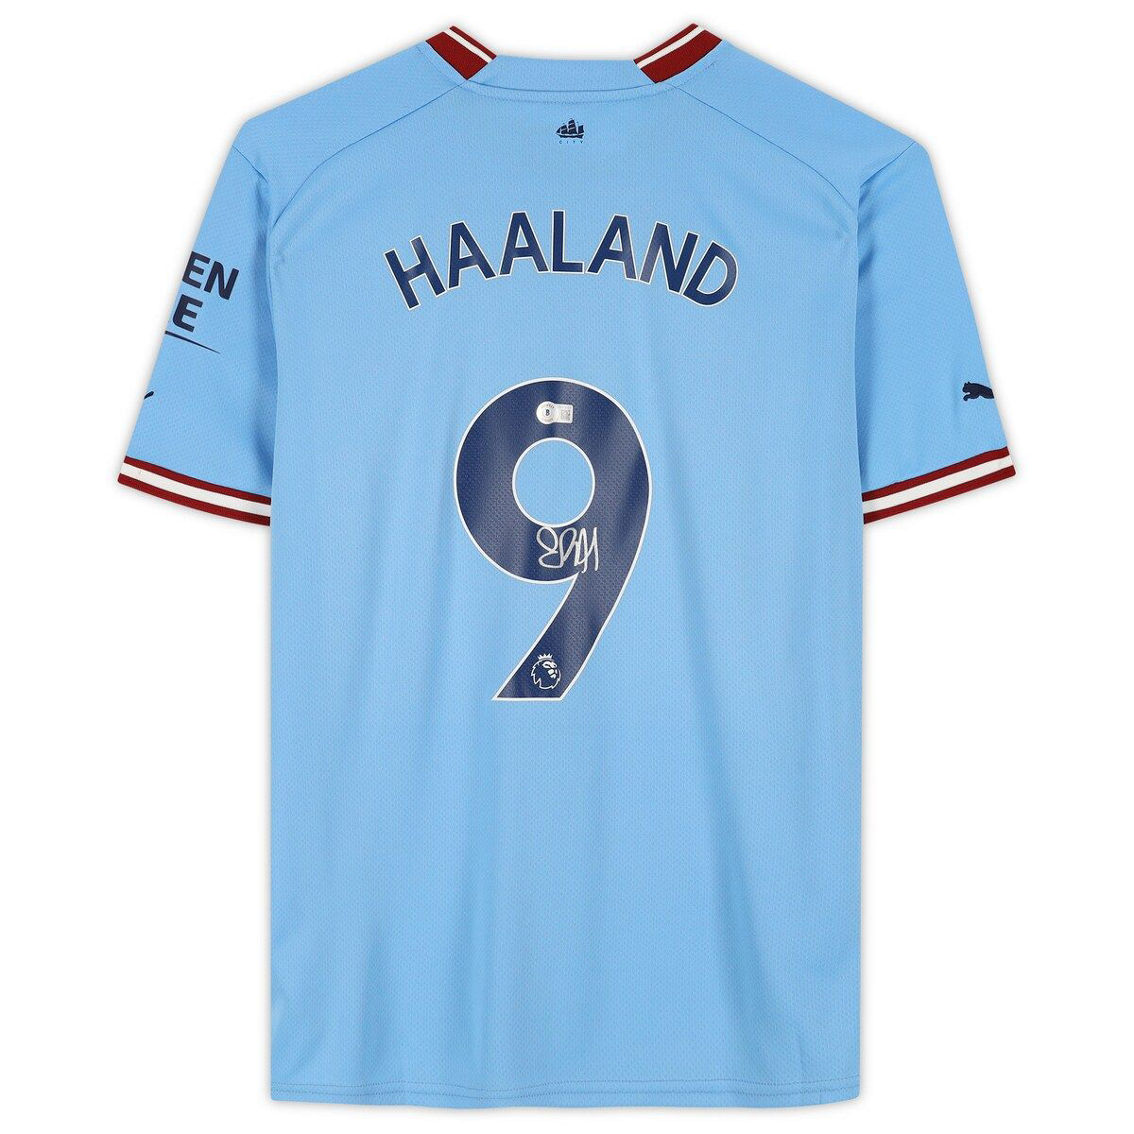 Fanatics Authentic Erling Haaland Blue Manchester City Autographed 2022-23 Home Jersey - Image 3 of 4